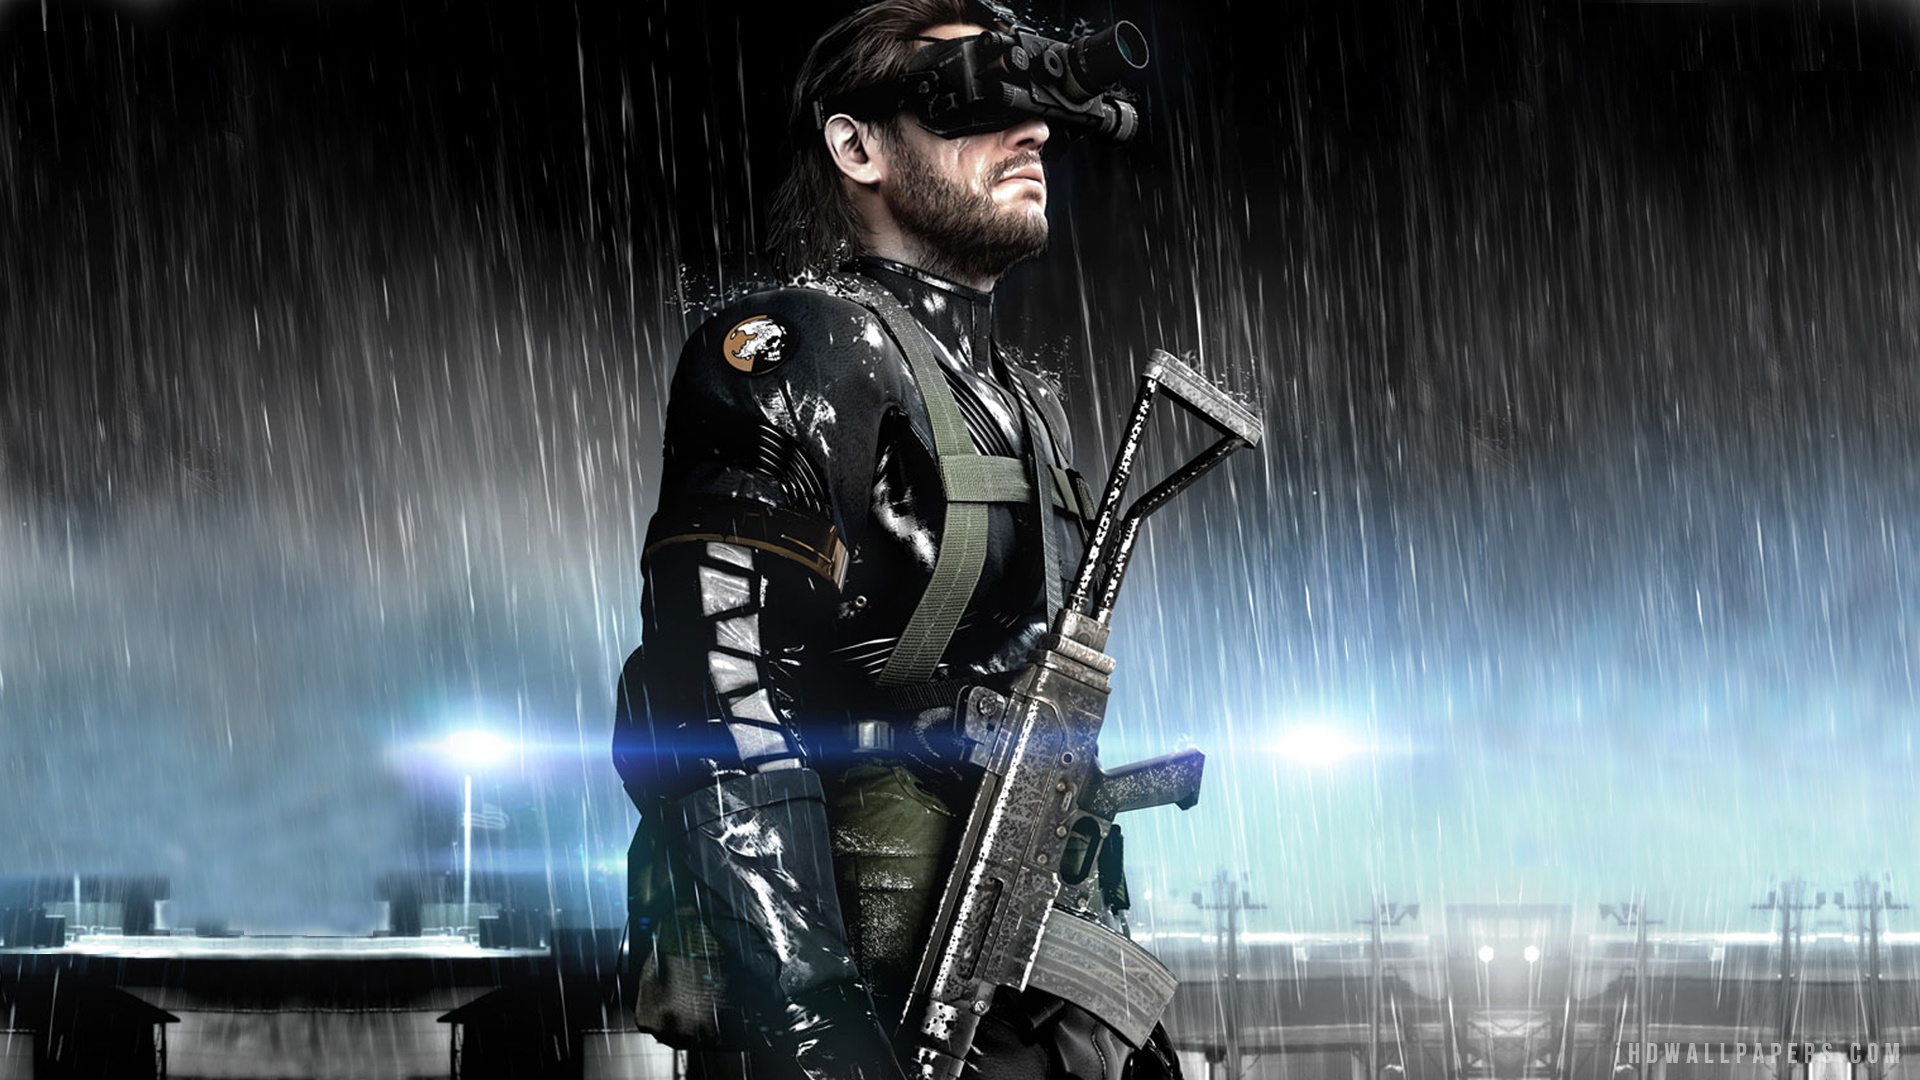 Metal Gear Solid V Ground Zeroes Game HD Wallpaper   iHD Wallpapers